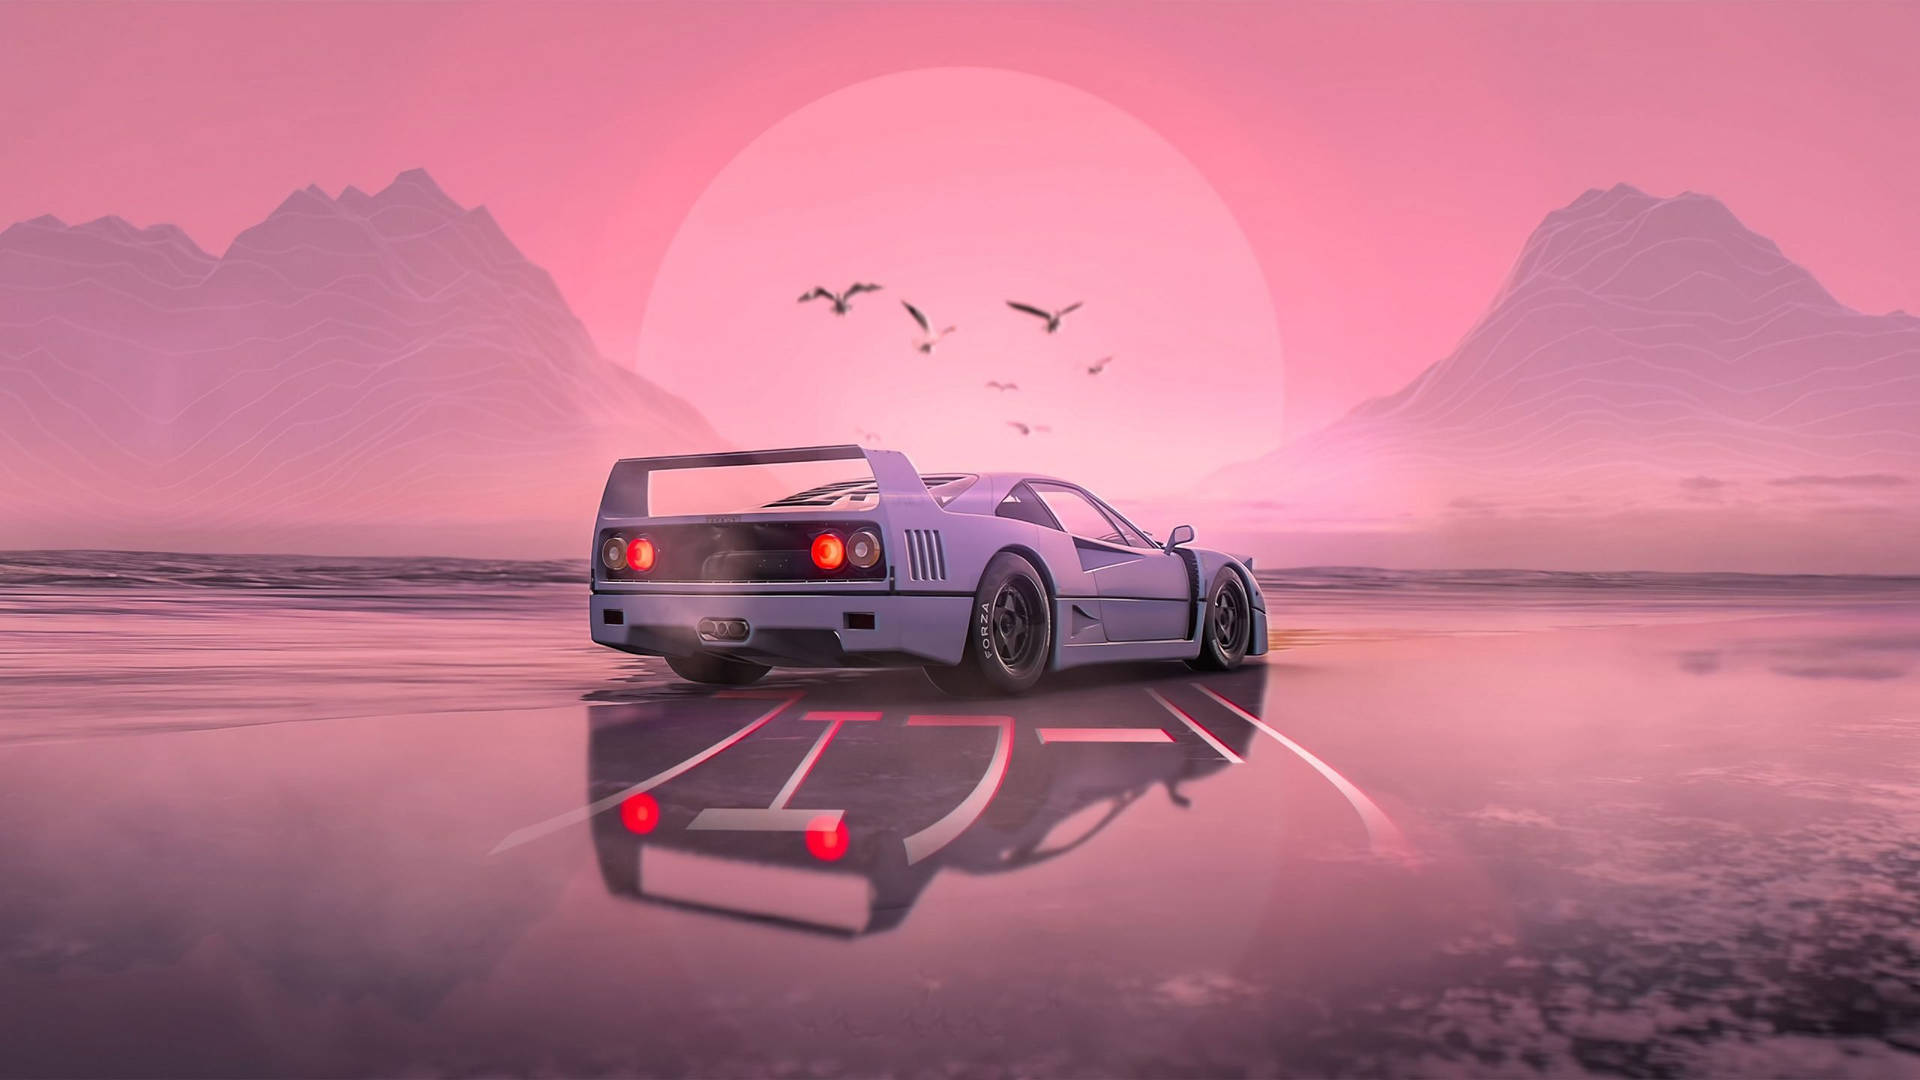 Pink Aesthetic Car On Water For Computer Wallpaper